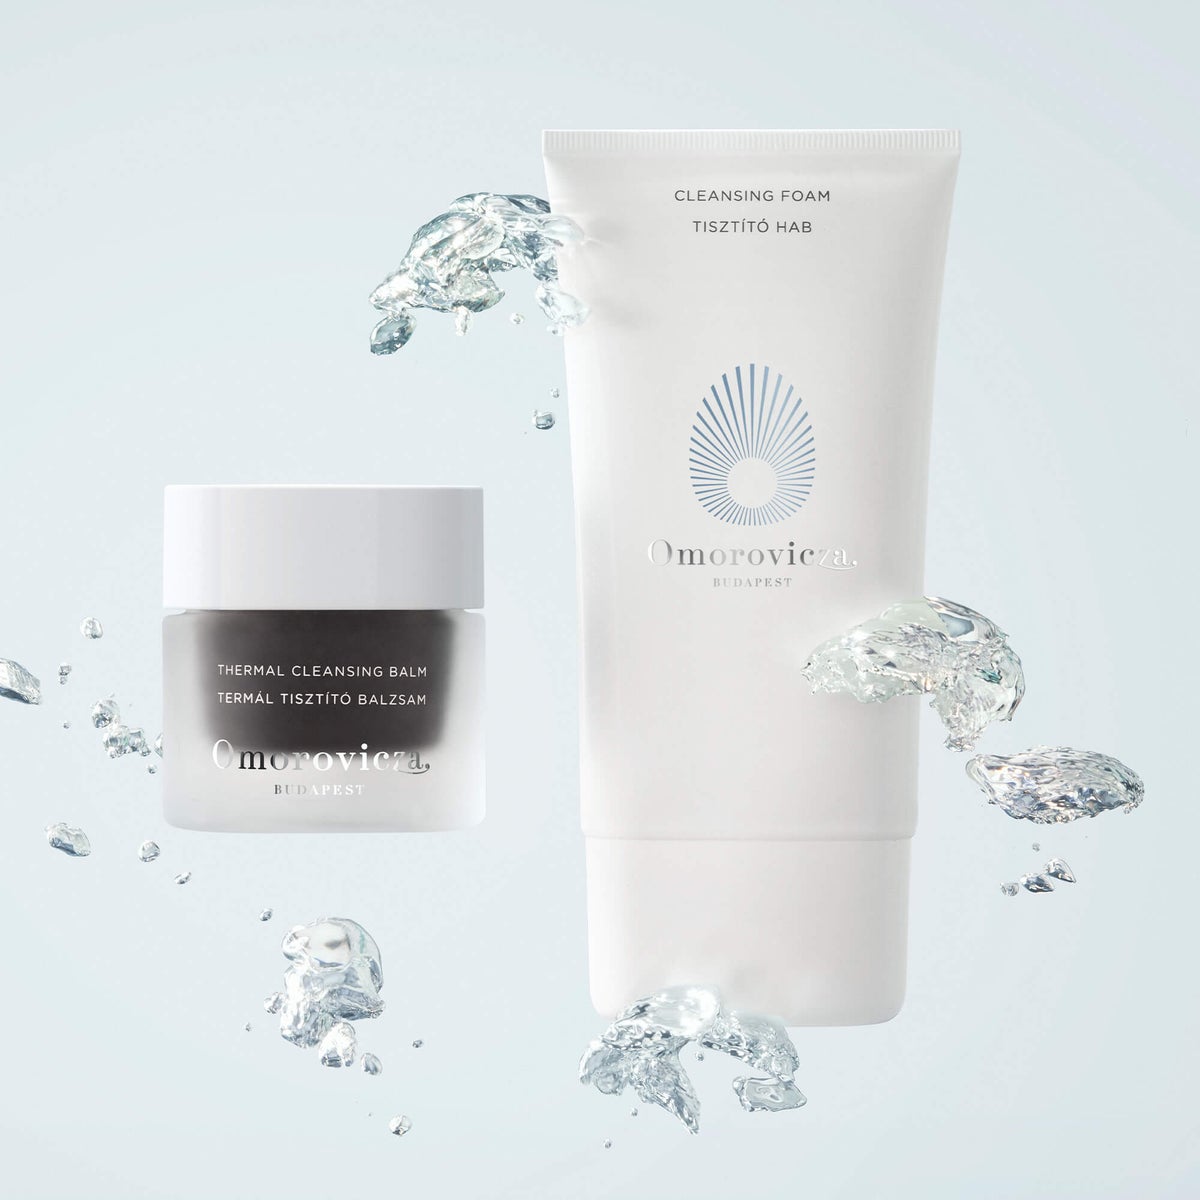 cleansing foam and thermal cleansing balm